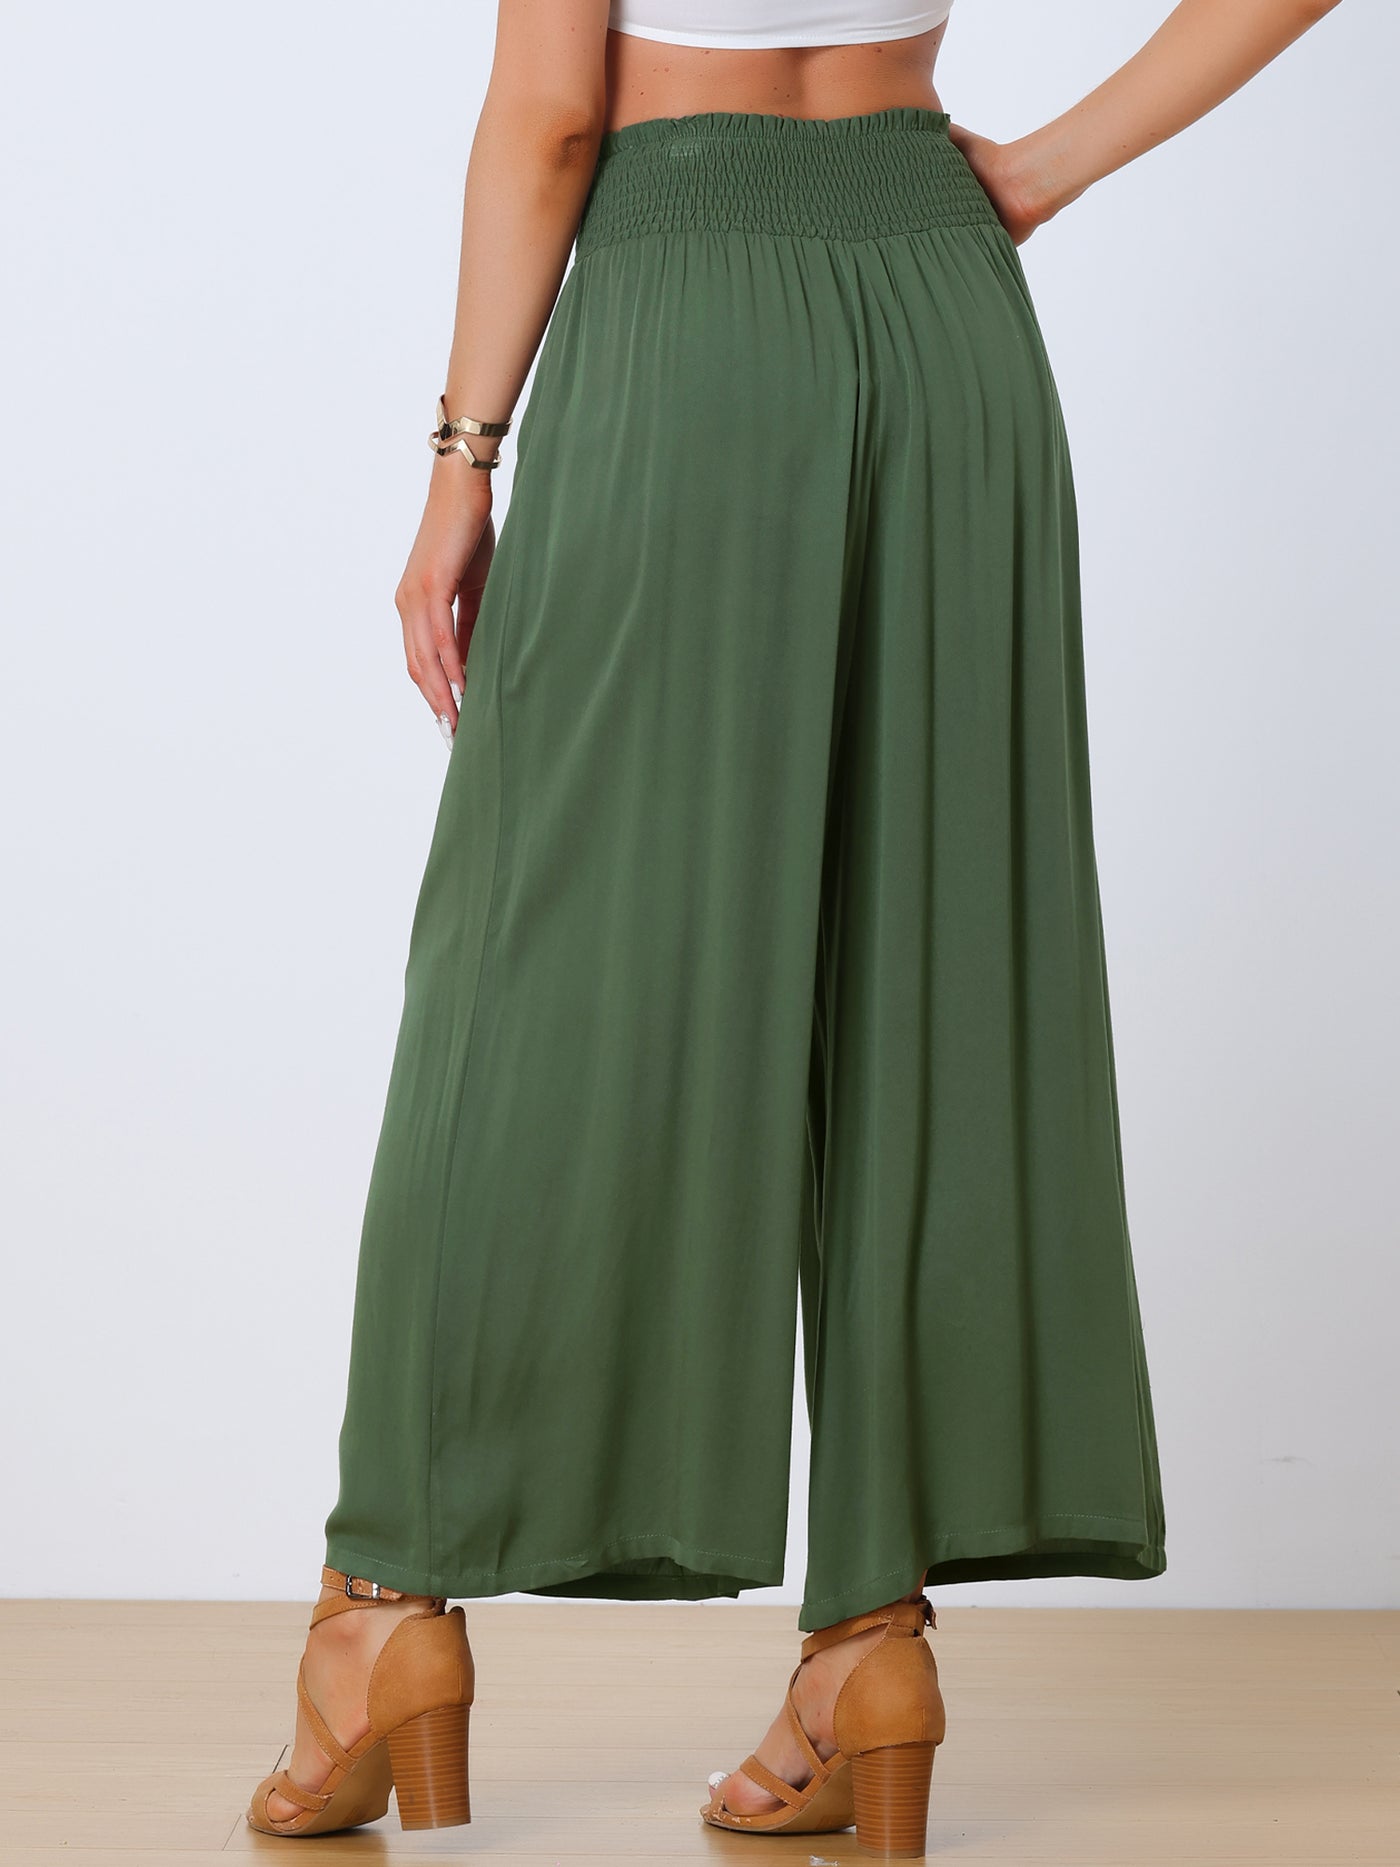 Allegra K Smocked High Waisted Loose Palazzo Lounge Casual Wide Leg Pants